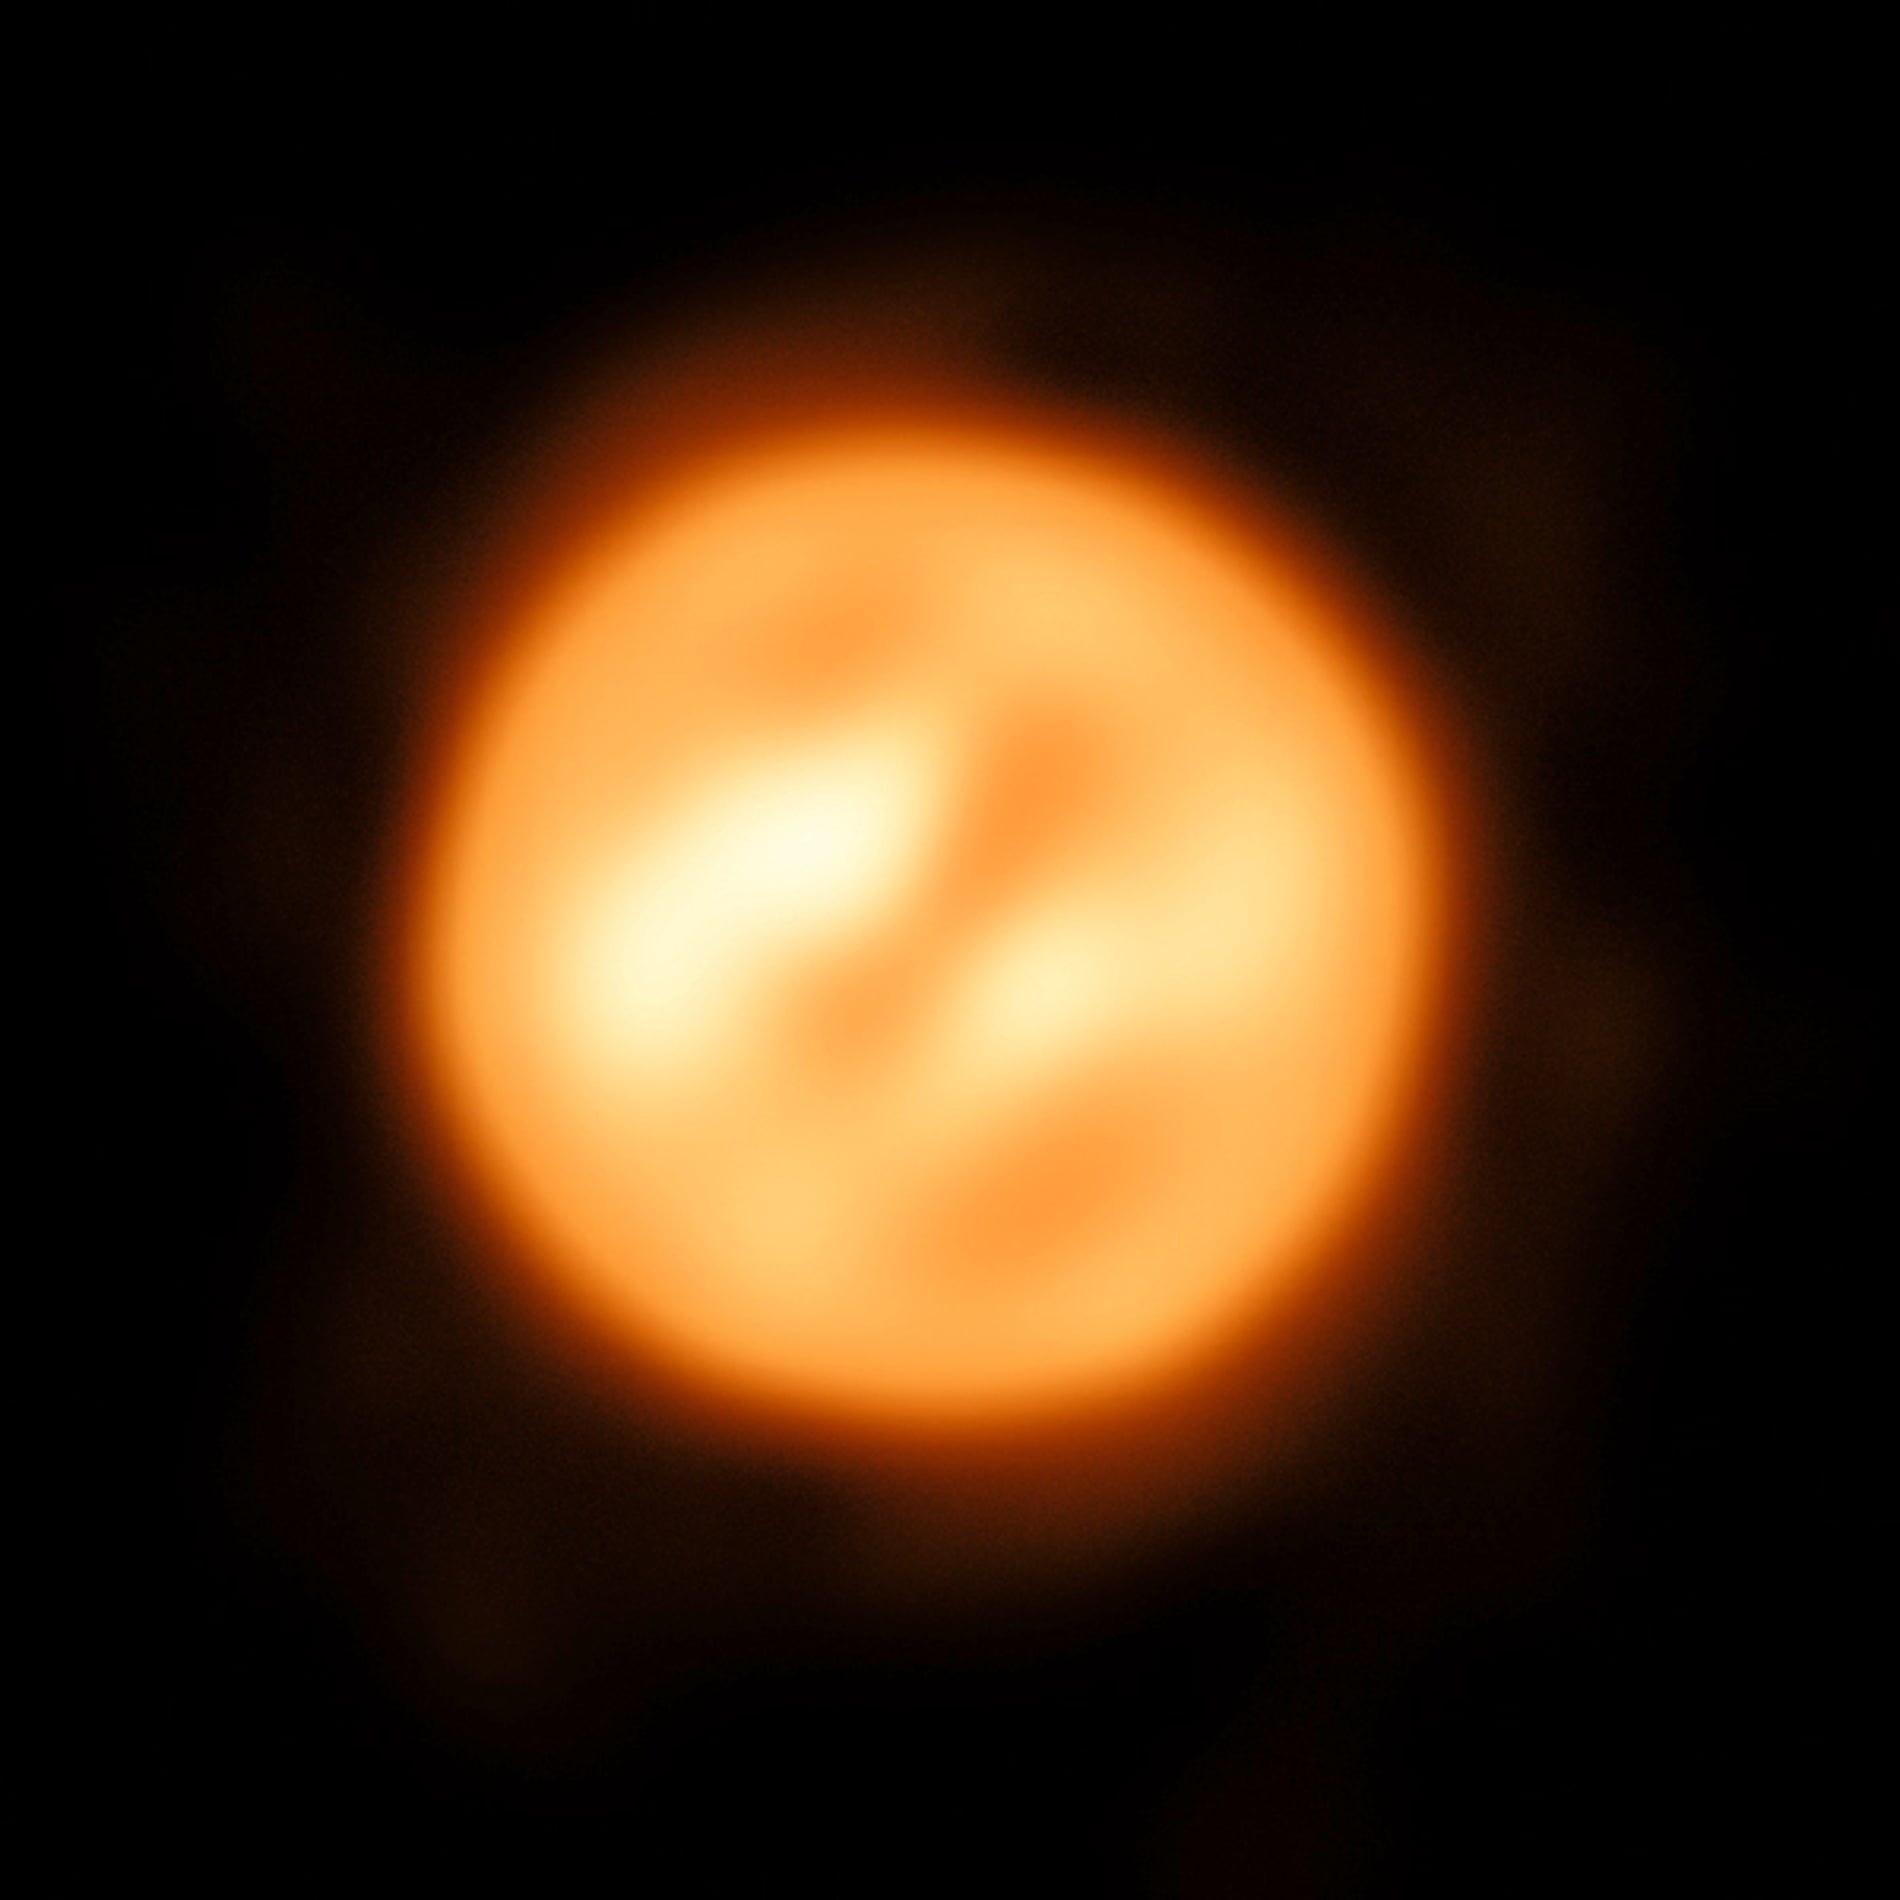 Using ESO’s Very Large Telescope Interferometer astronomers have constructed this remarkable image of the red supergiant star Antares. This is the most detailed image ever of this object, or any other star apart from the sun.